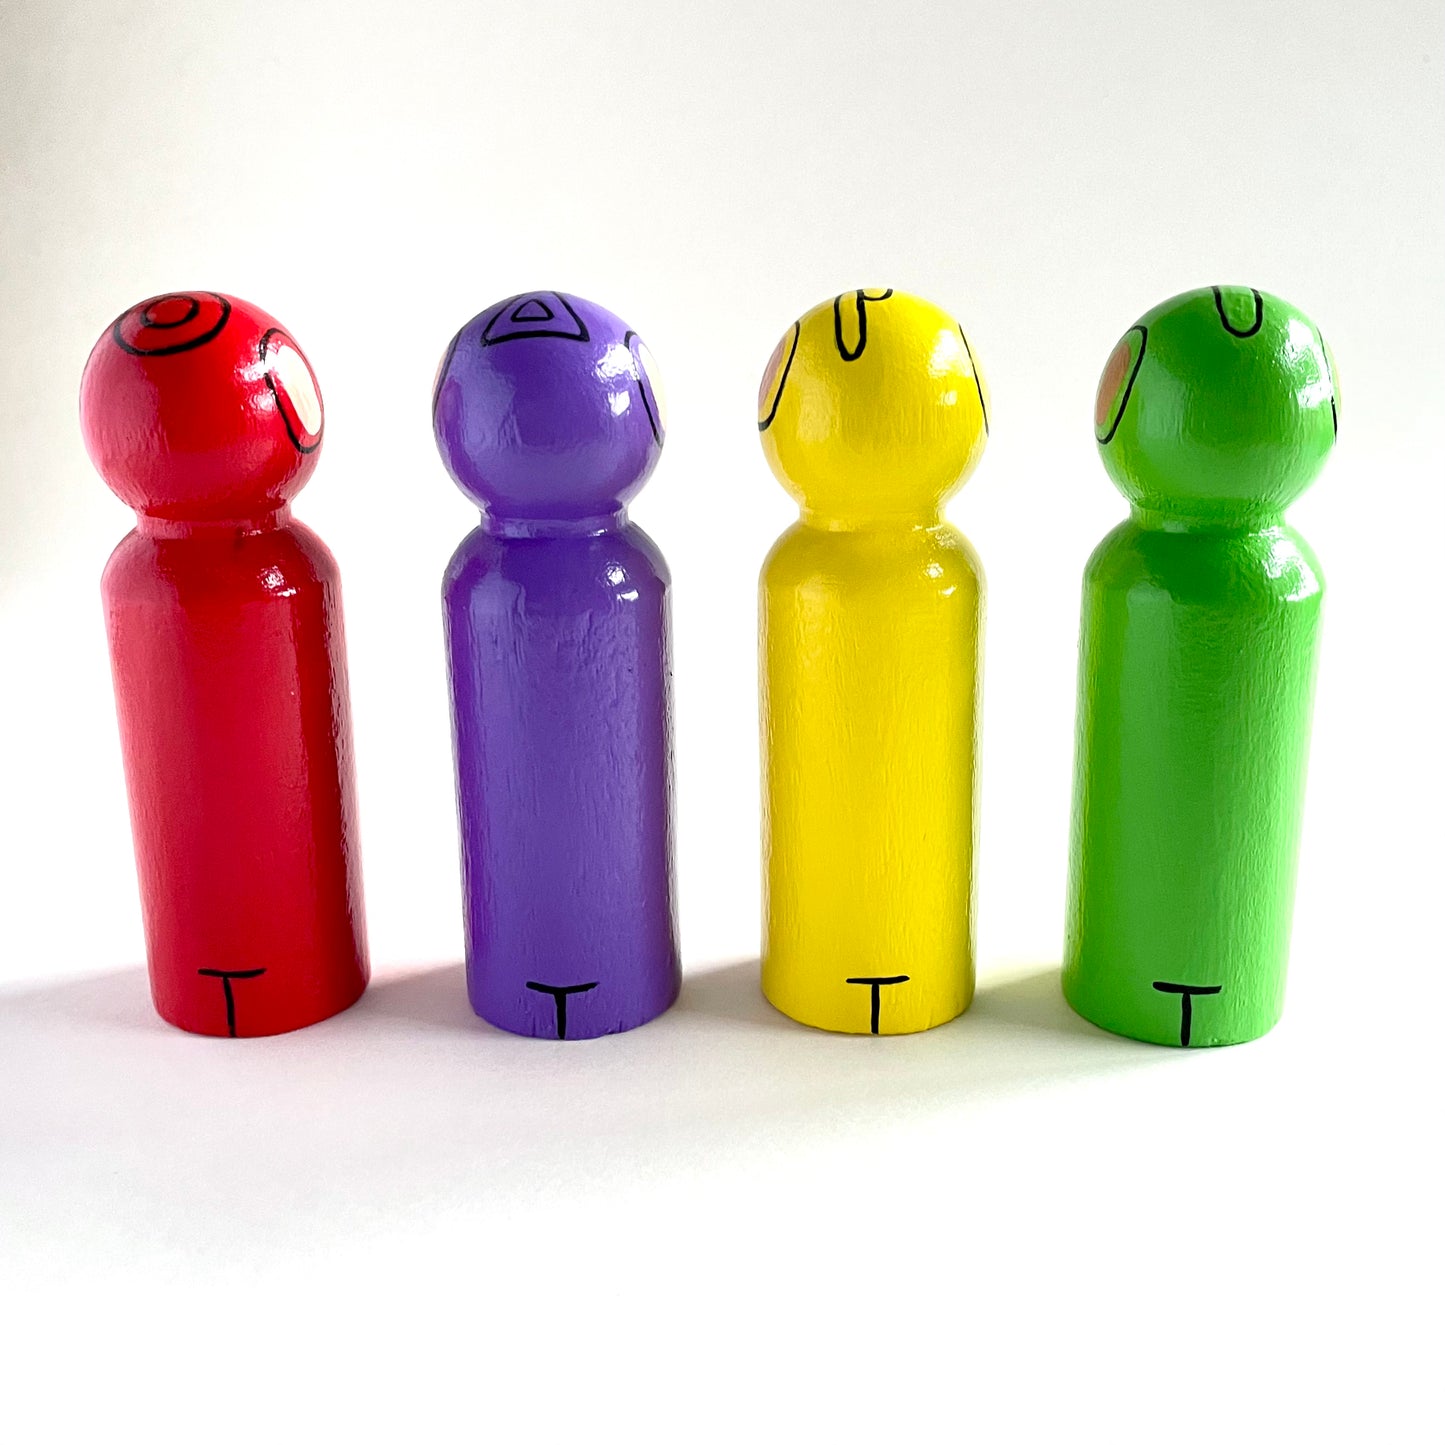 Teletubbies Large Character Pegs